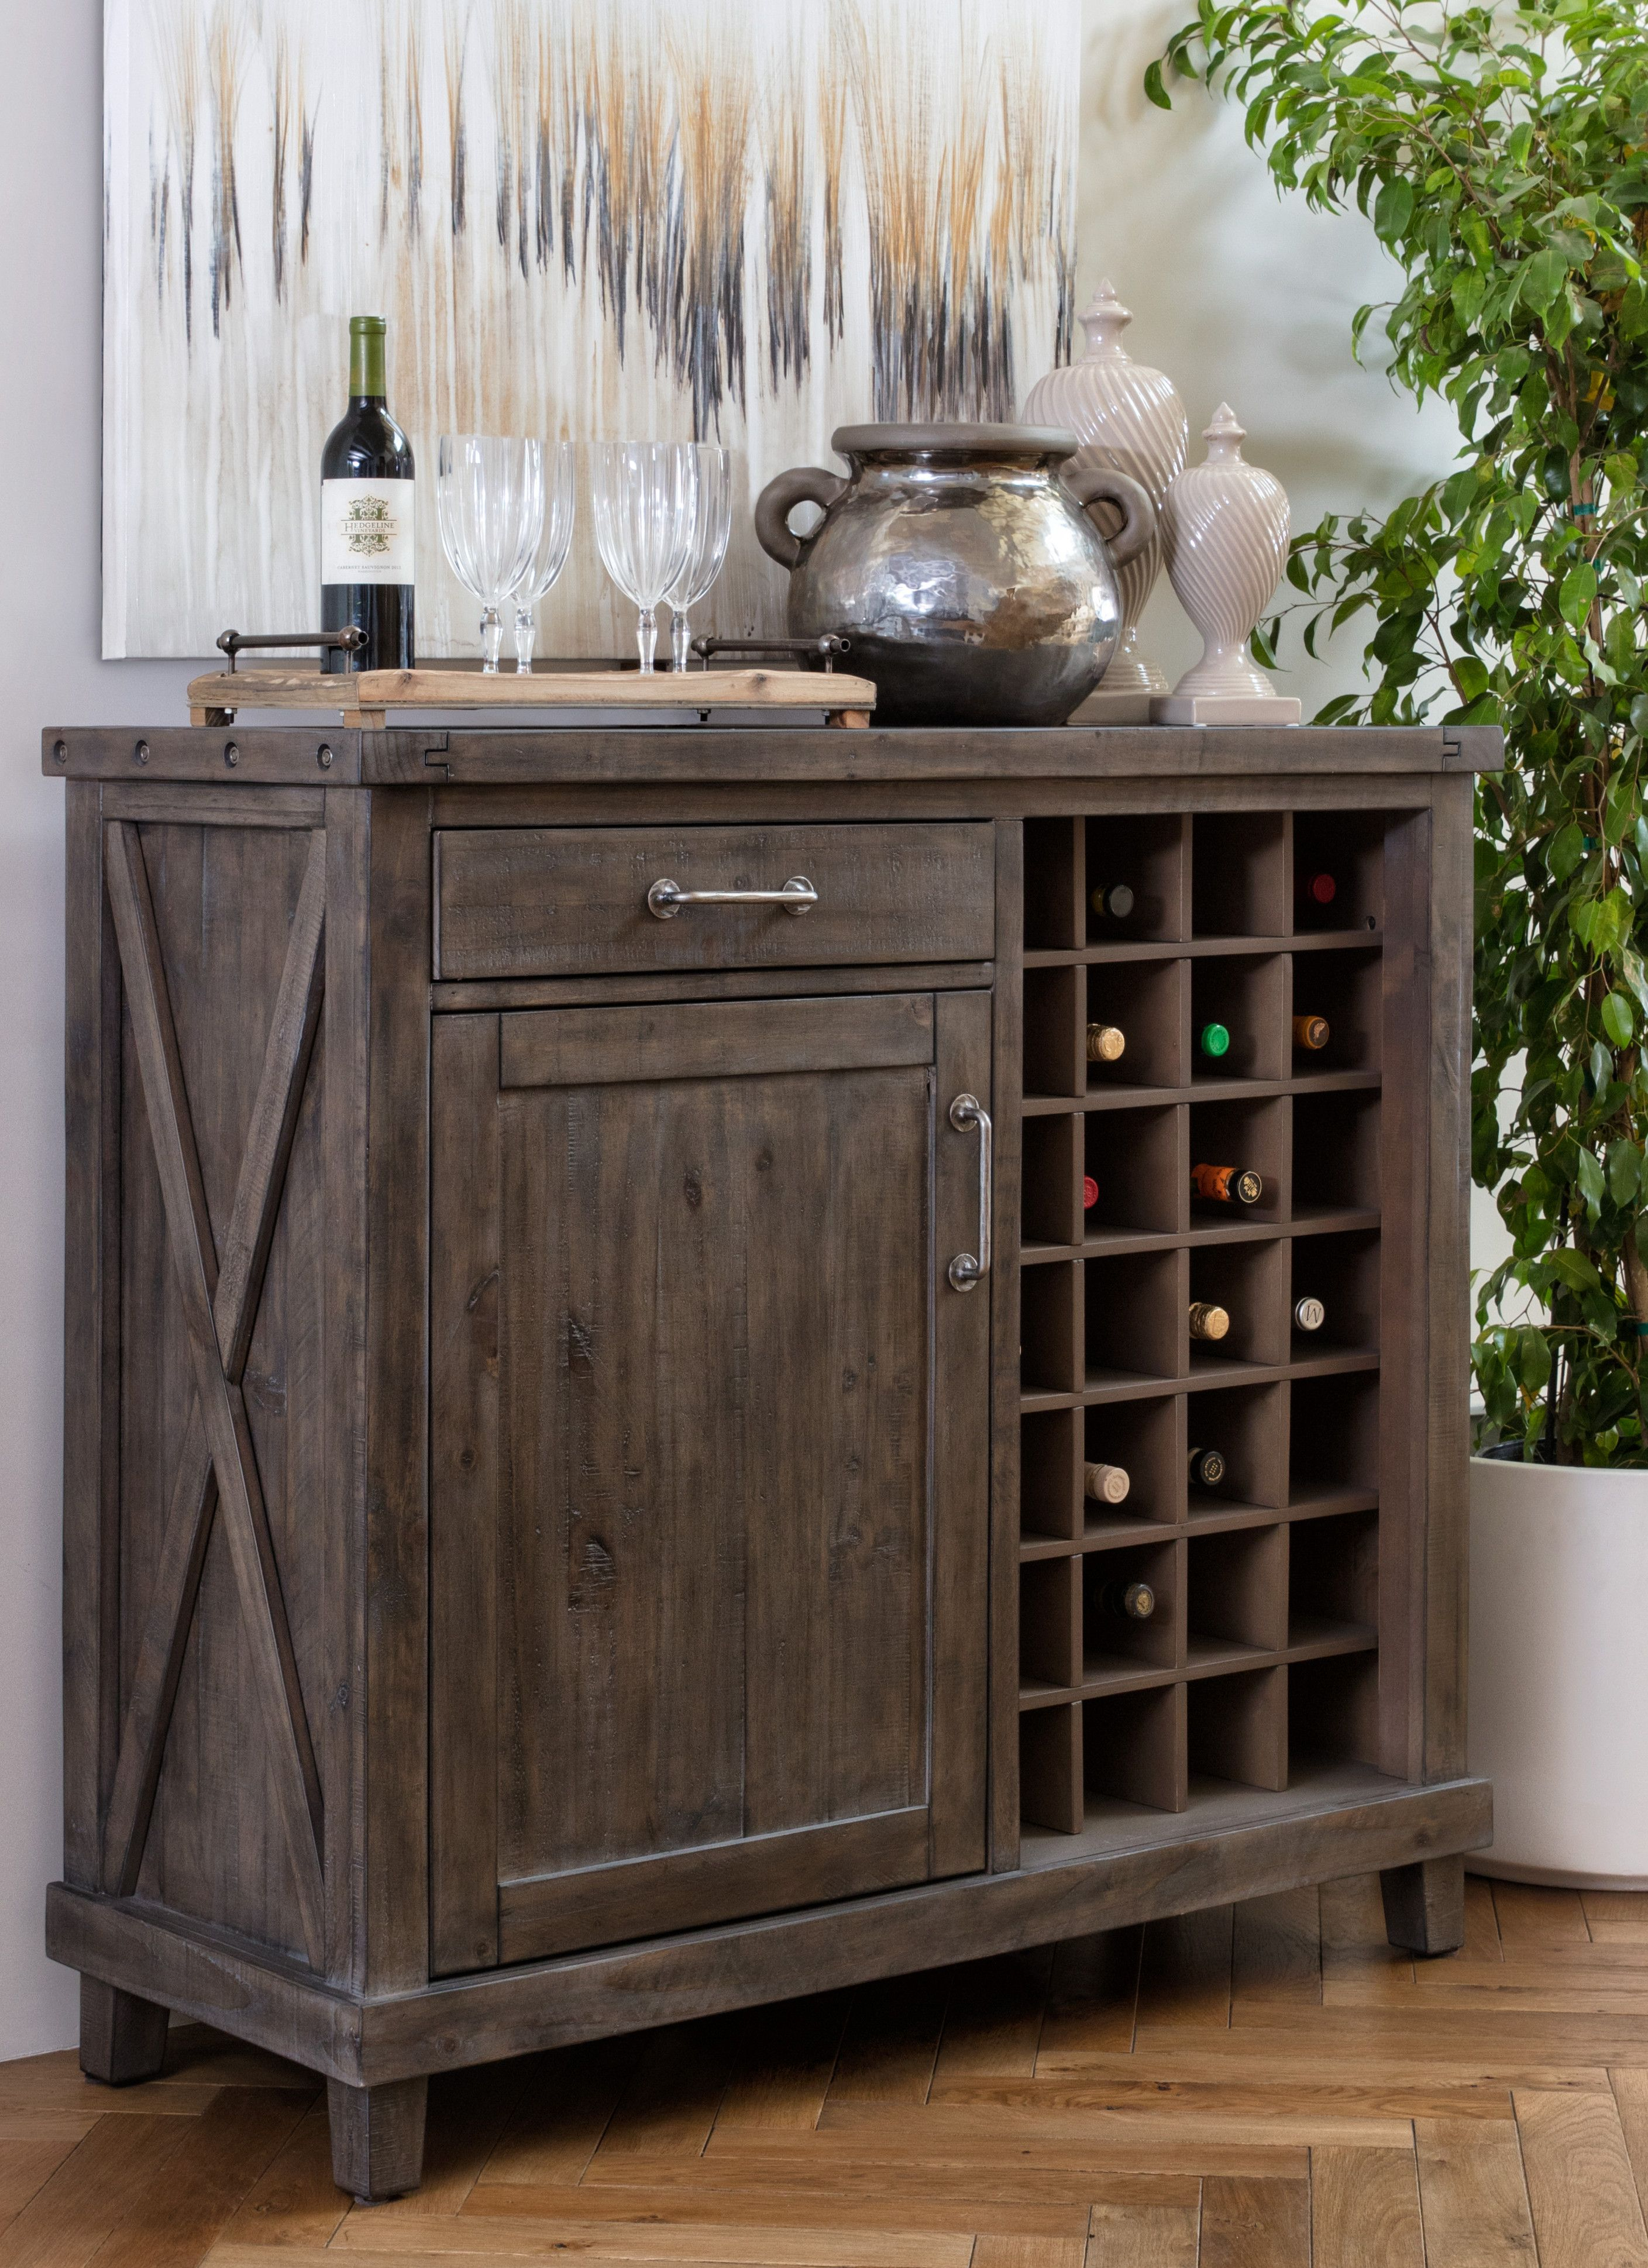 Jaxon Grey Wine Cabinet Rustic Modern Designs In 2019 intended for sizing 2817 X 3877